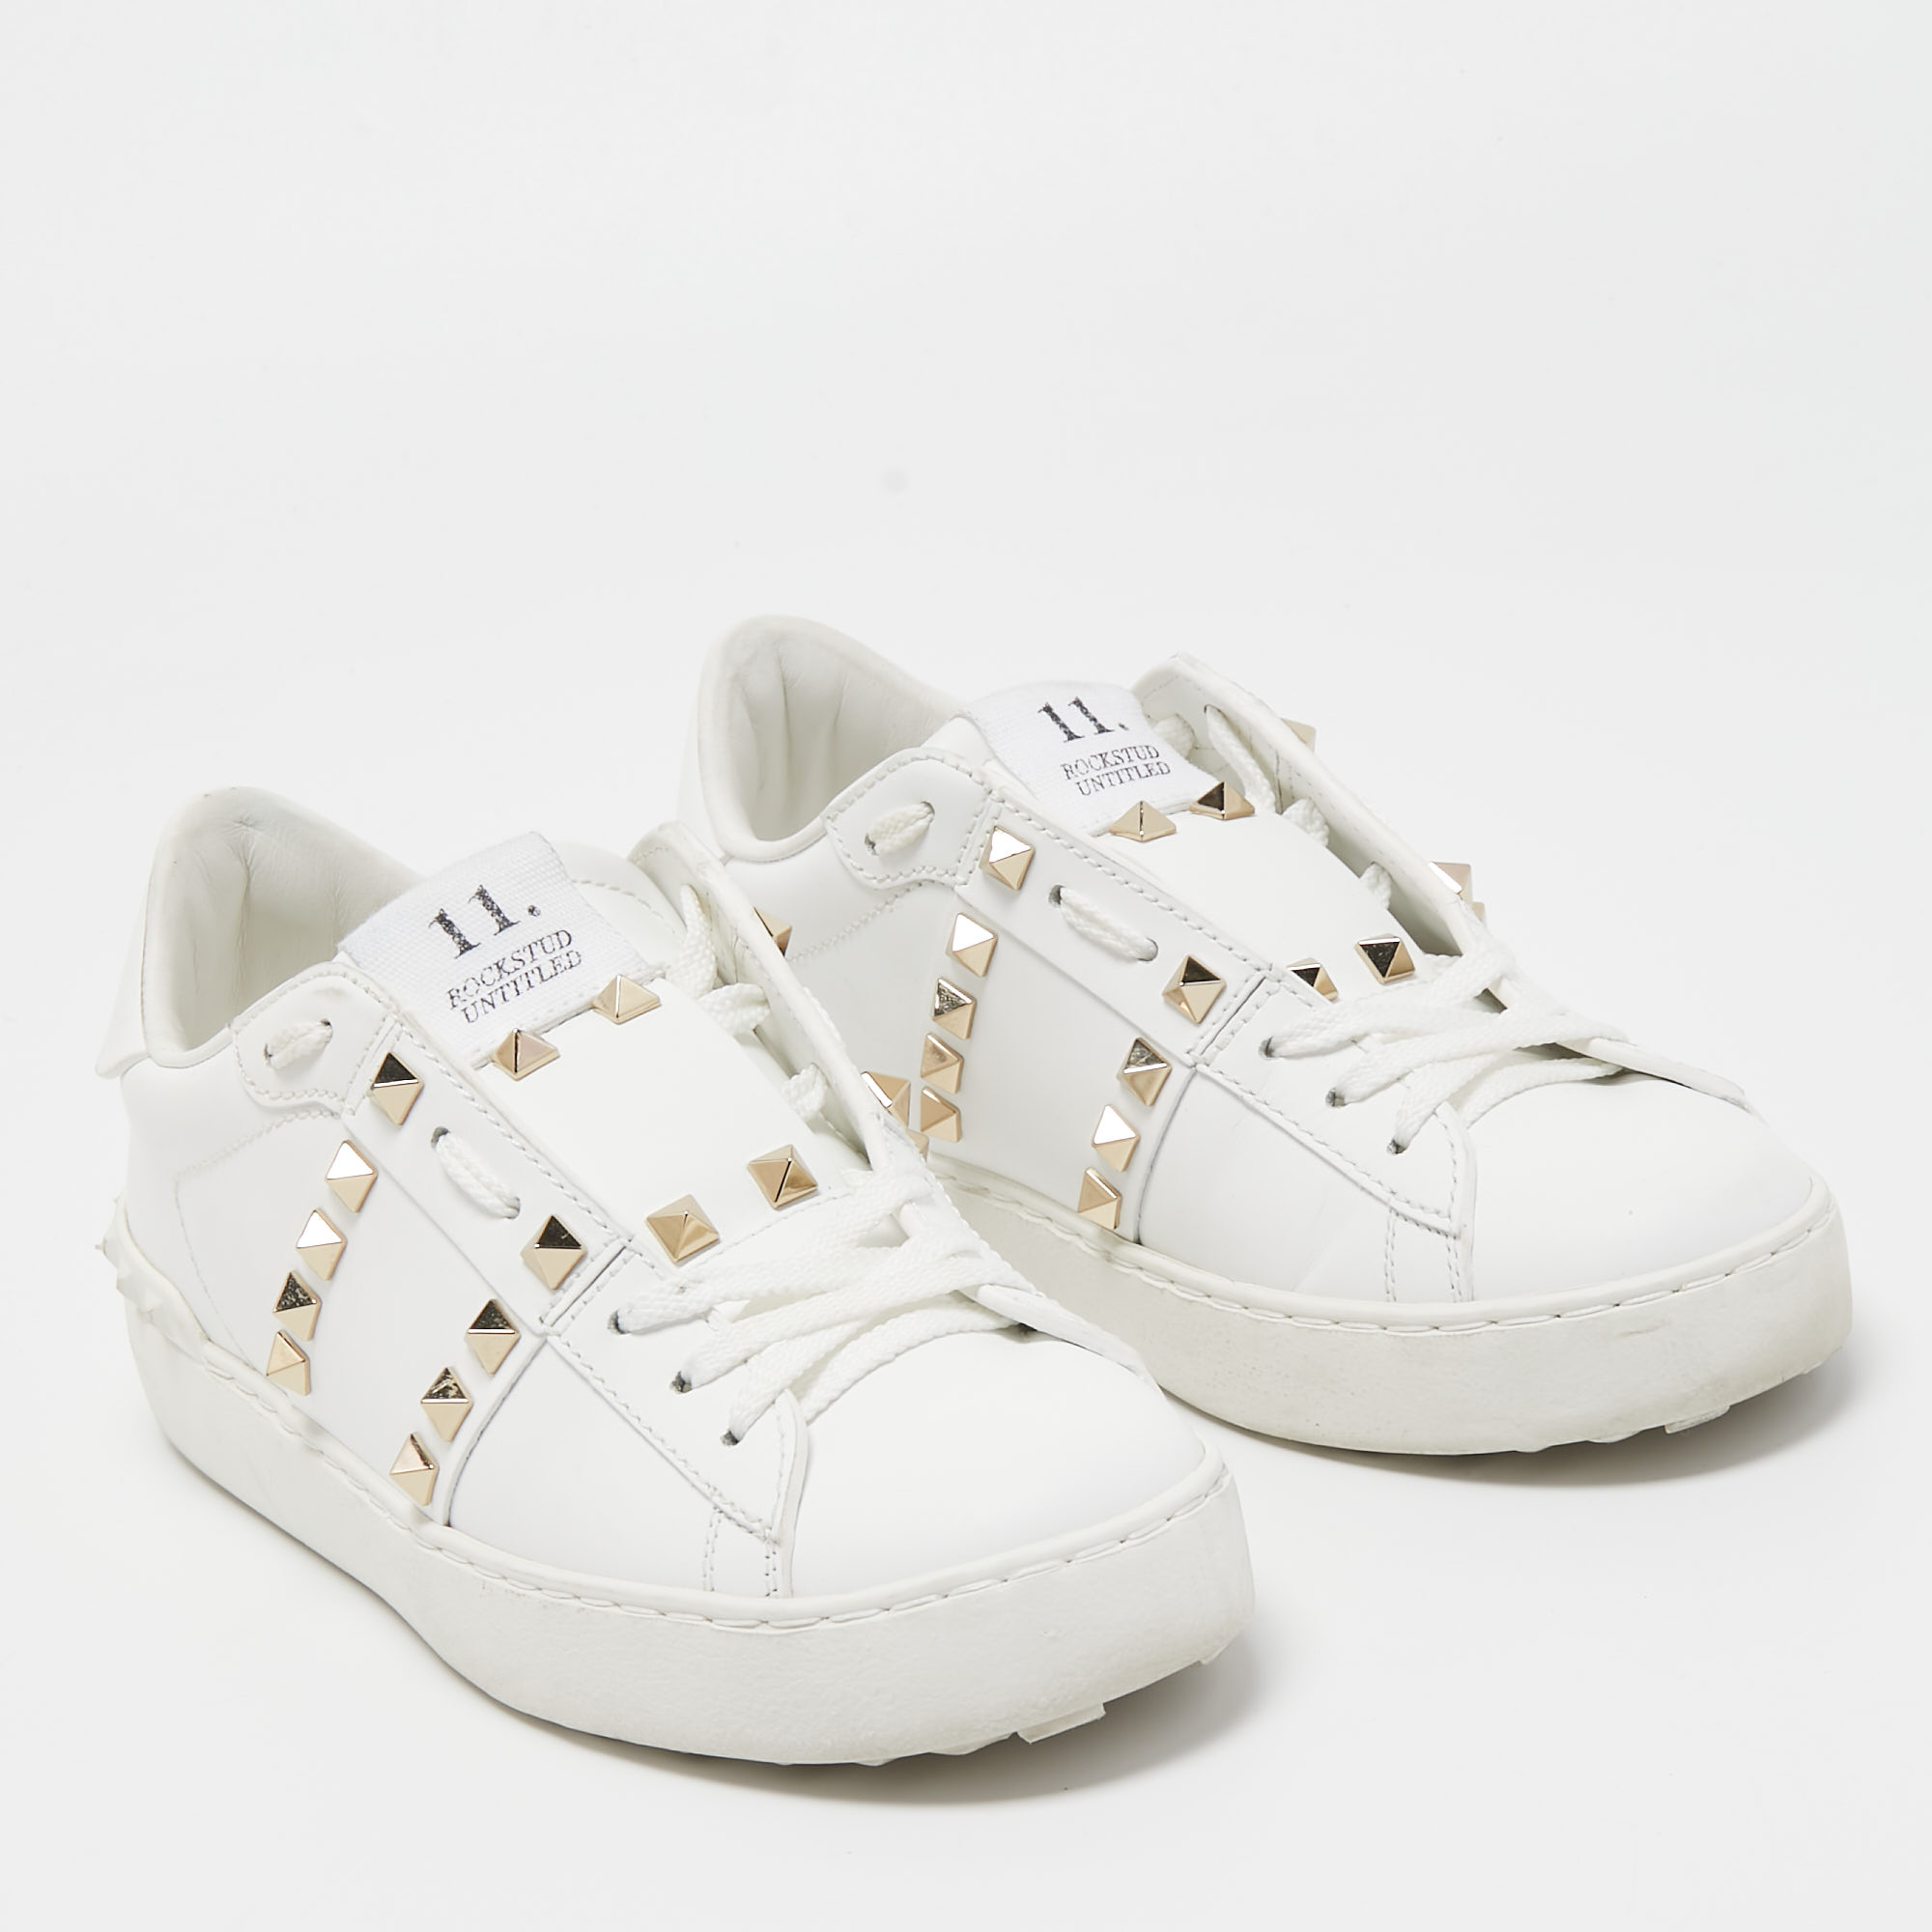 Valentino White Leather Rockstud Low Top Sneakers Size 35.5